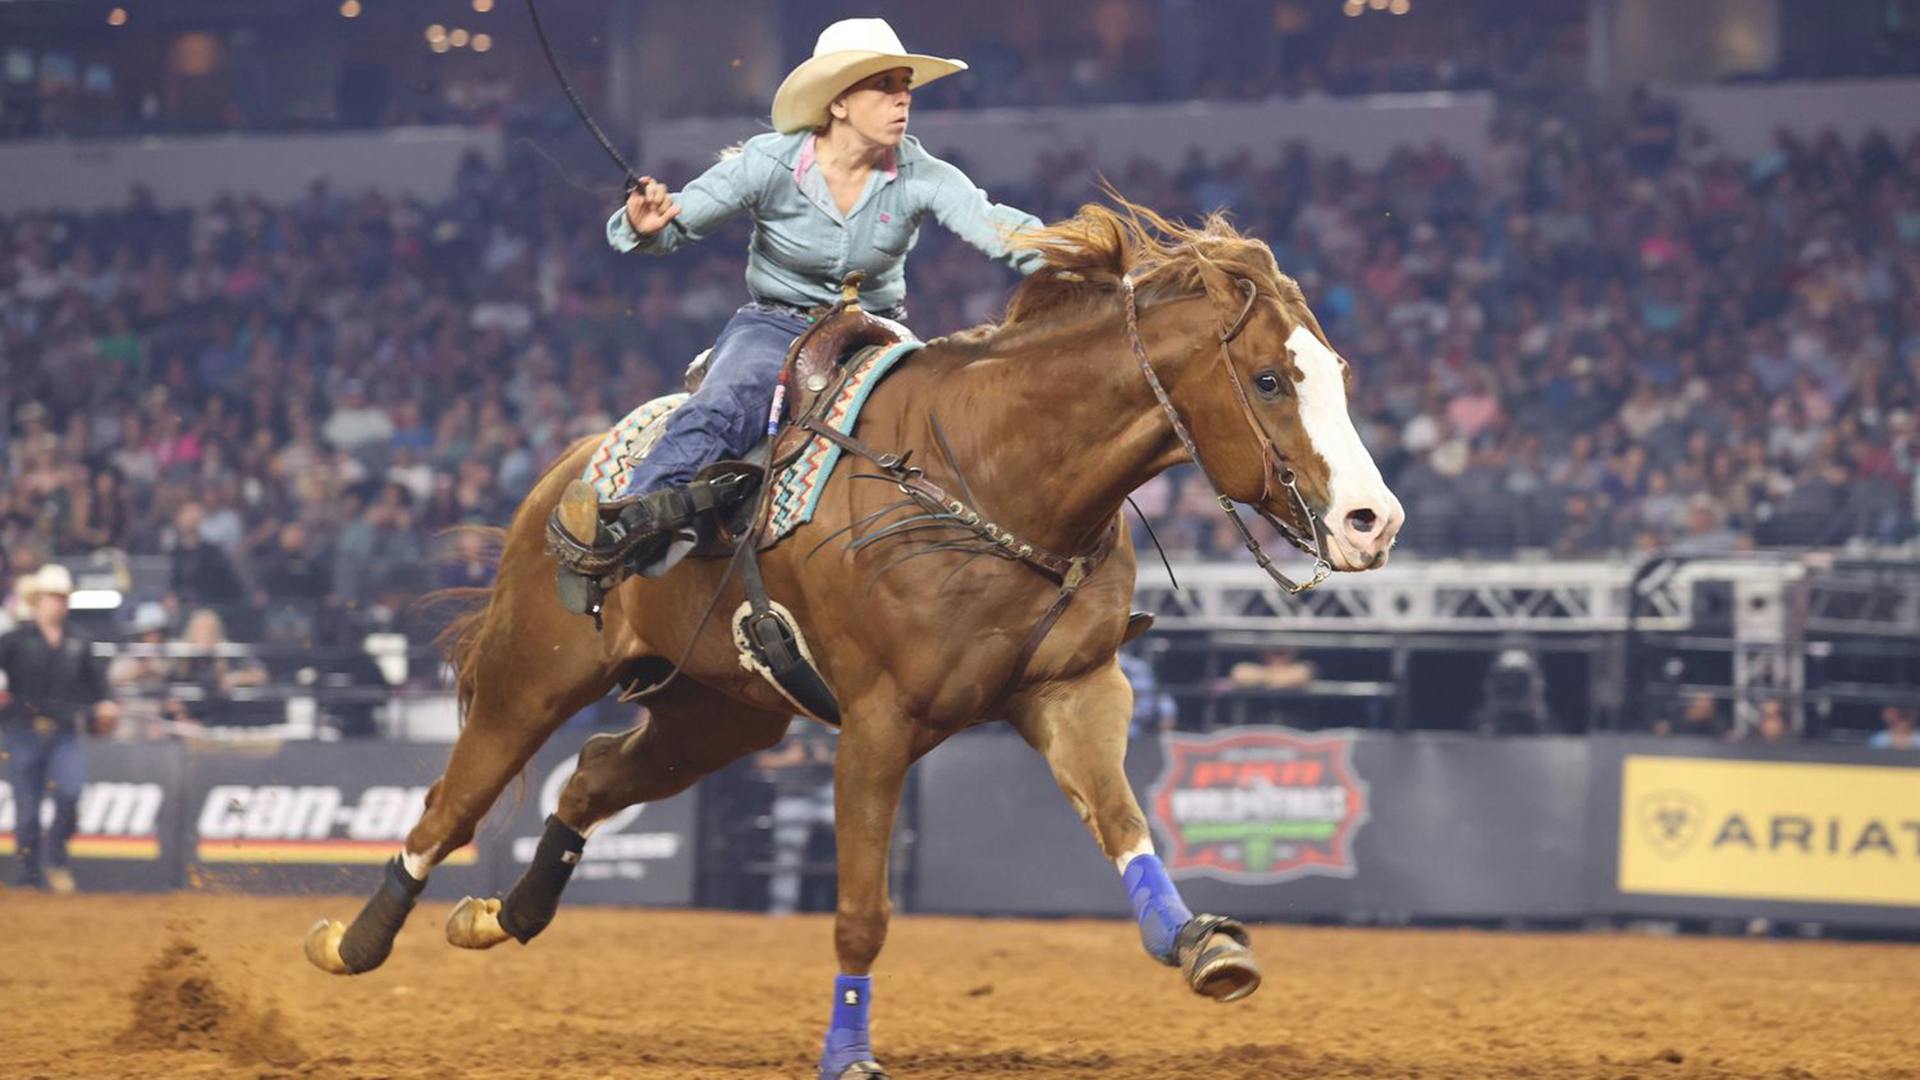 Womens-Rodeo-051924-1920x1080